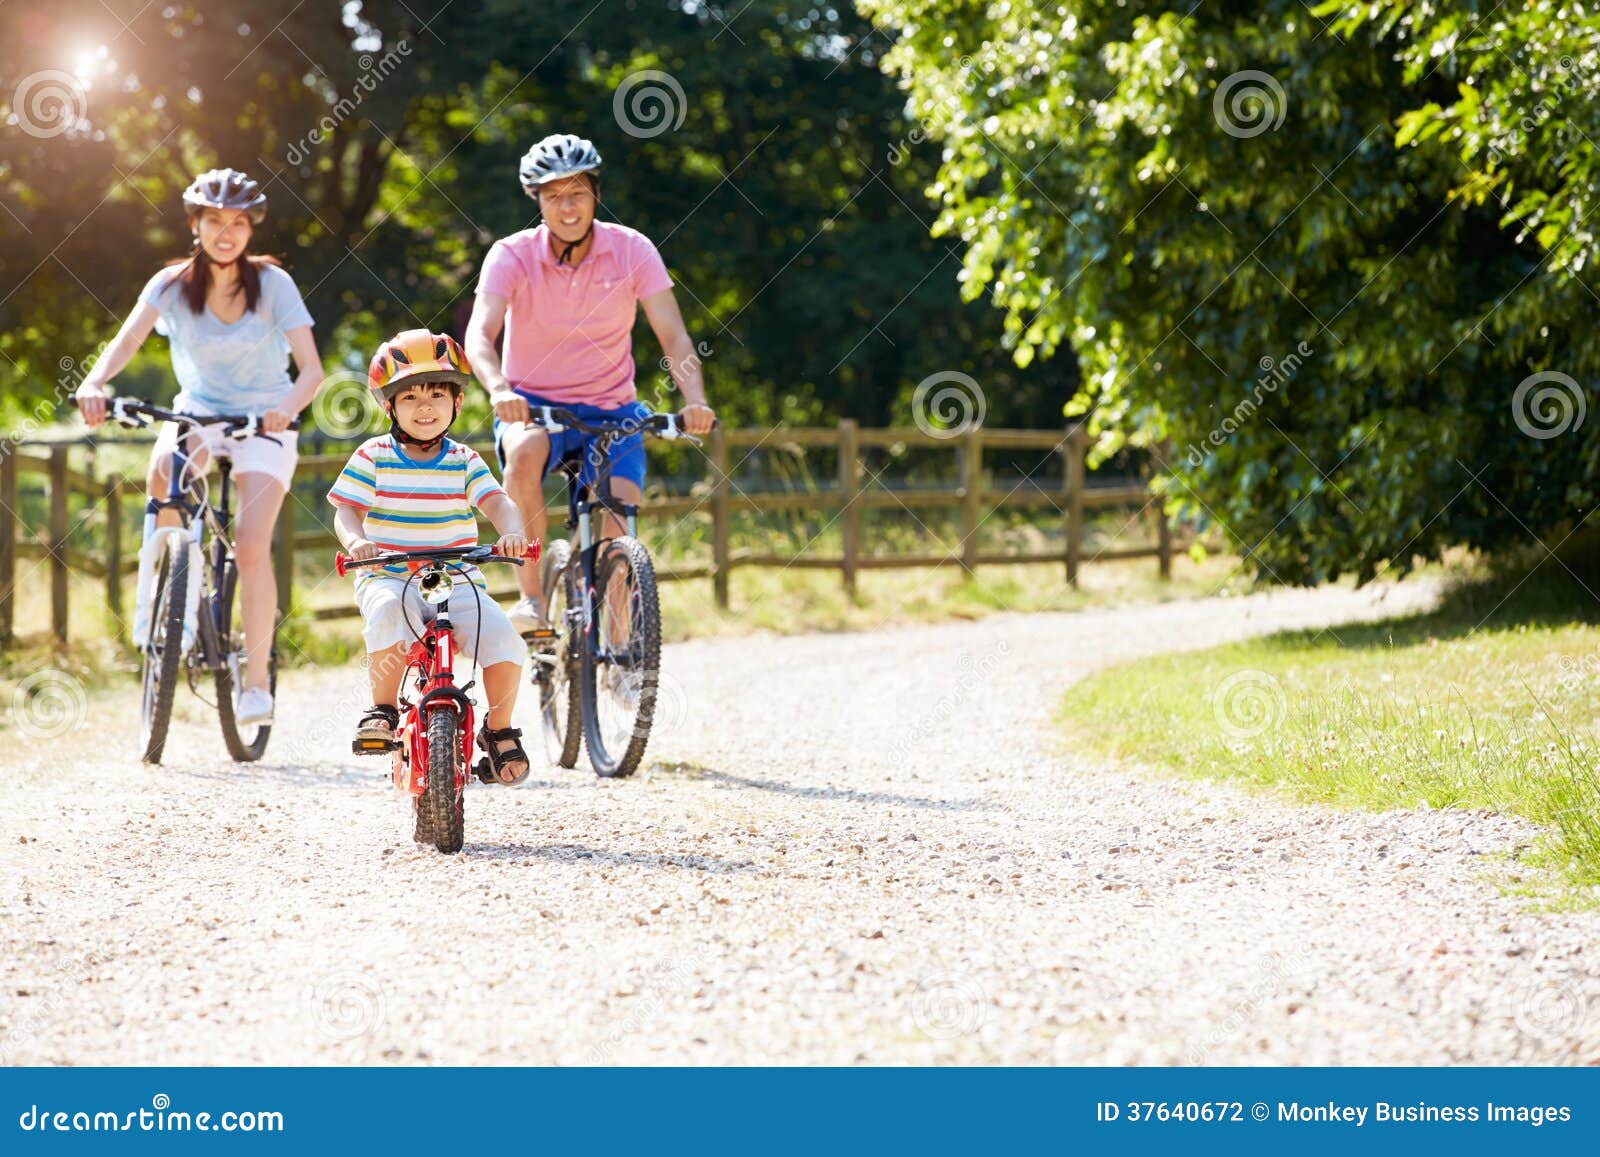 asian family on cycle ride in countryside